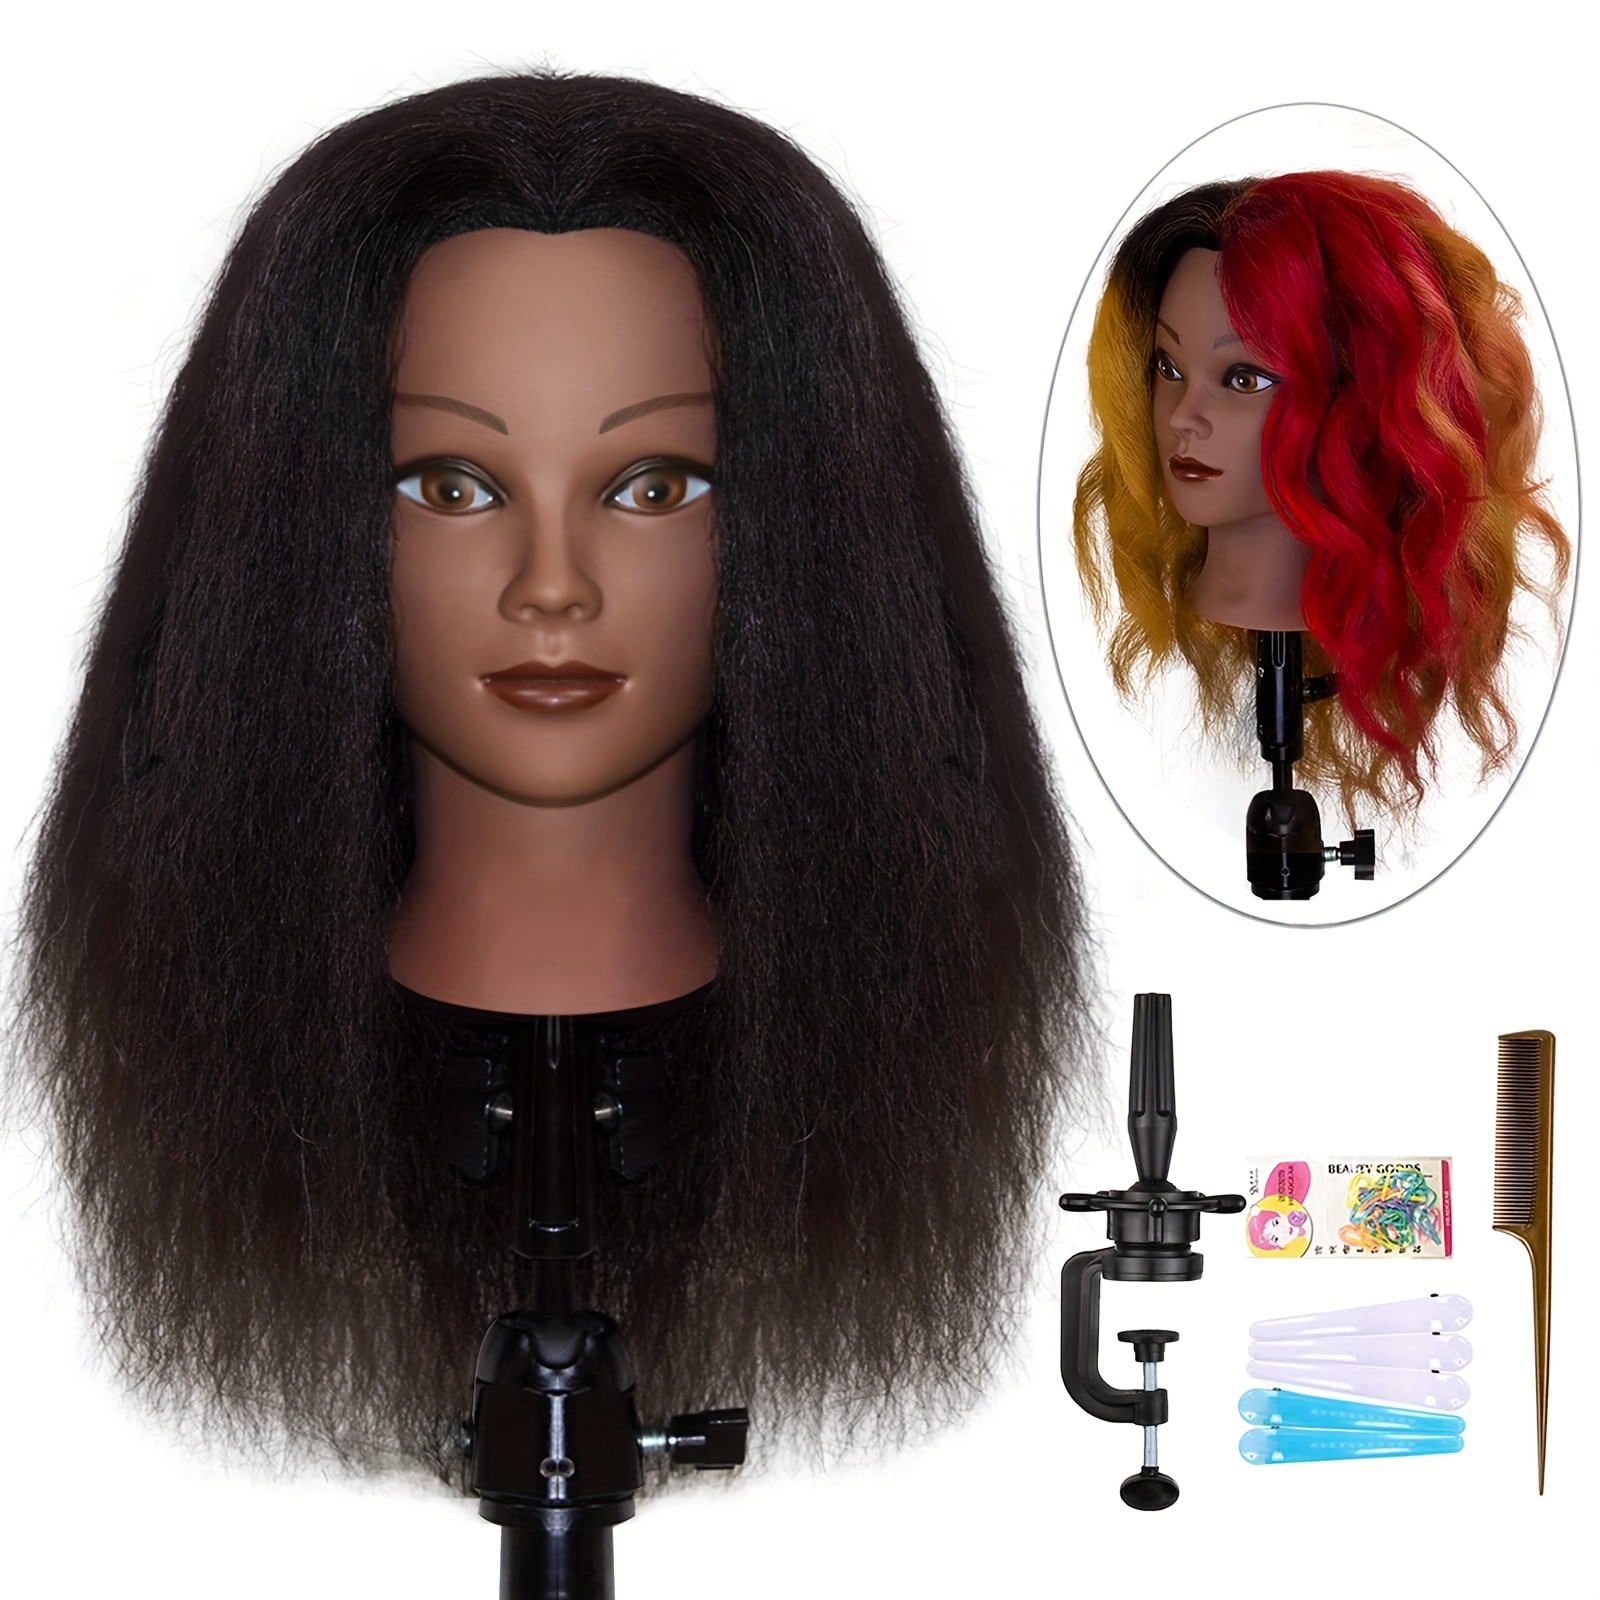 Mannequin Head with 100% Human Hair, TopDirect 18 Black Real Hair  Cosmetology Mannequin Head Hair Styling Hairdressing Practice Training Doll  Heads